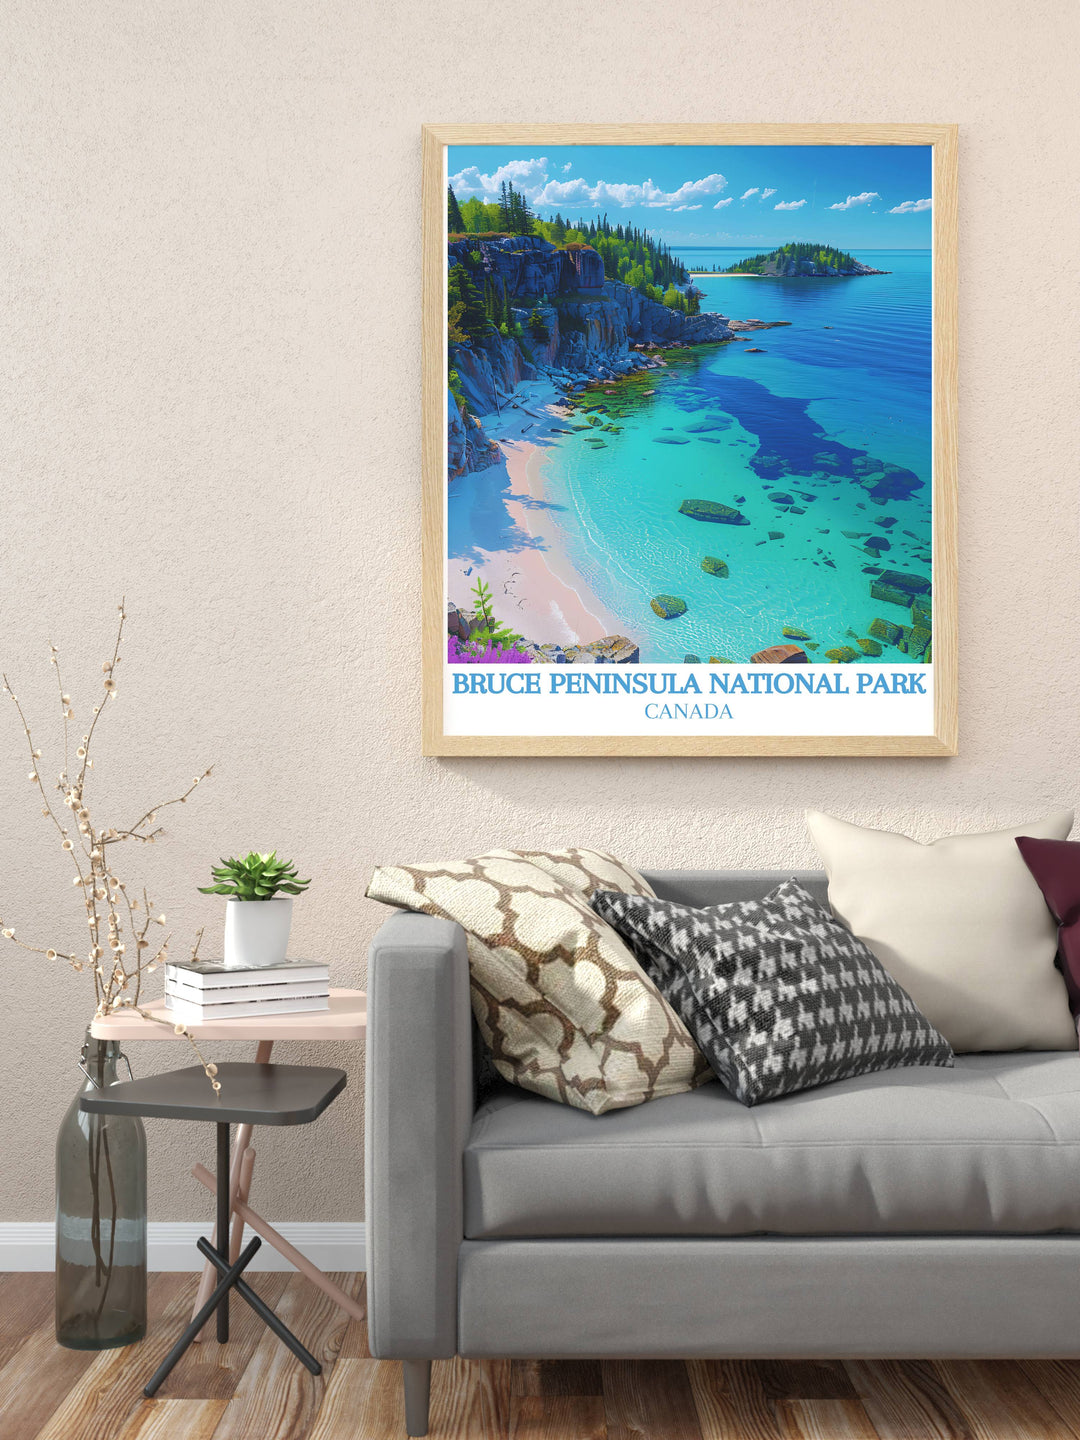 The Flowerpot Island Landscape Print brings the enchanting scenery of this iconic location to life perfect for enhancing your living space with a touch of natural beauty and inspiring a sense of adventure and exploration